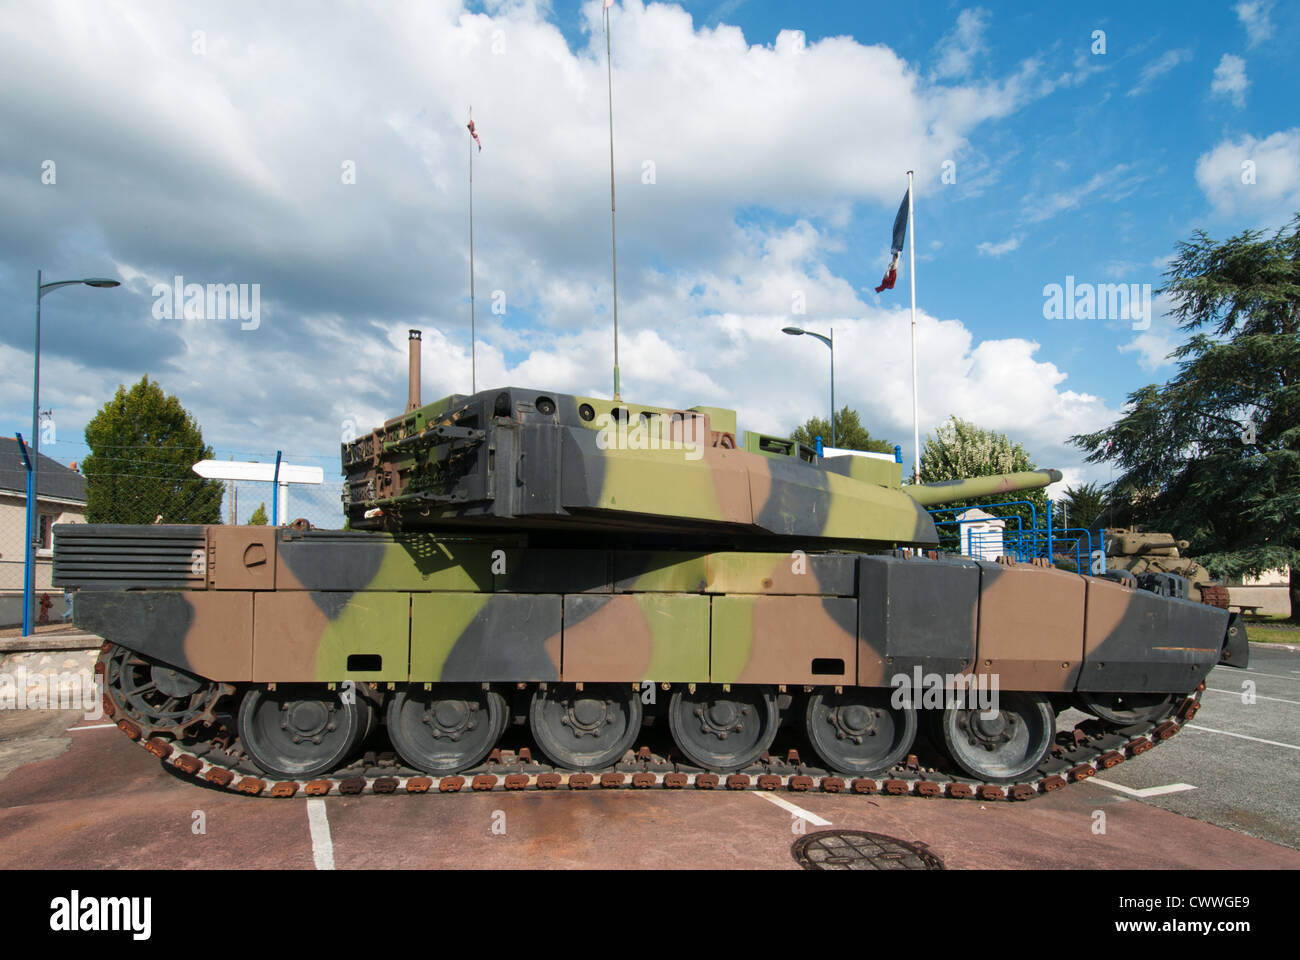 A camouflaged tank at Musee des Blindes, the tank museum at Saumur, Loire Valley, France. Stock Photo